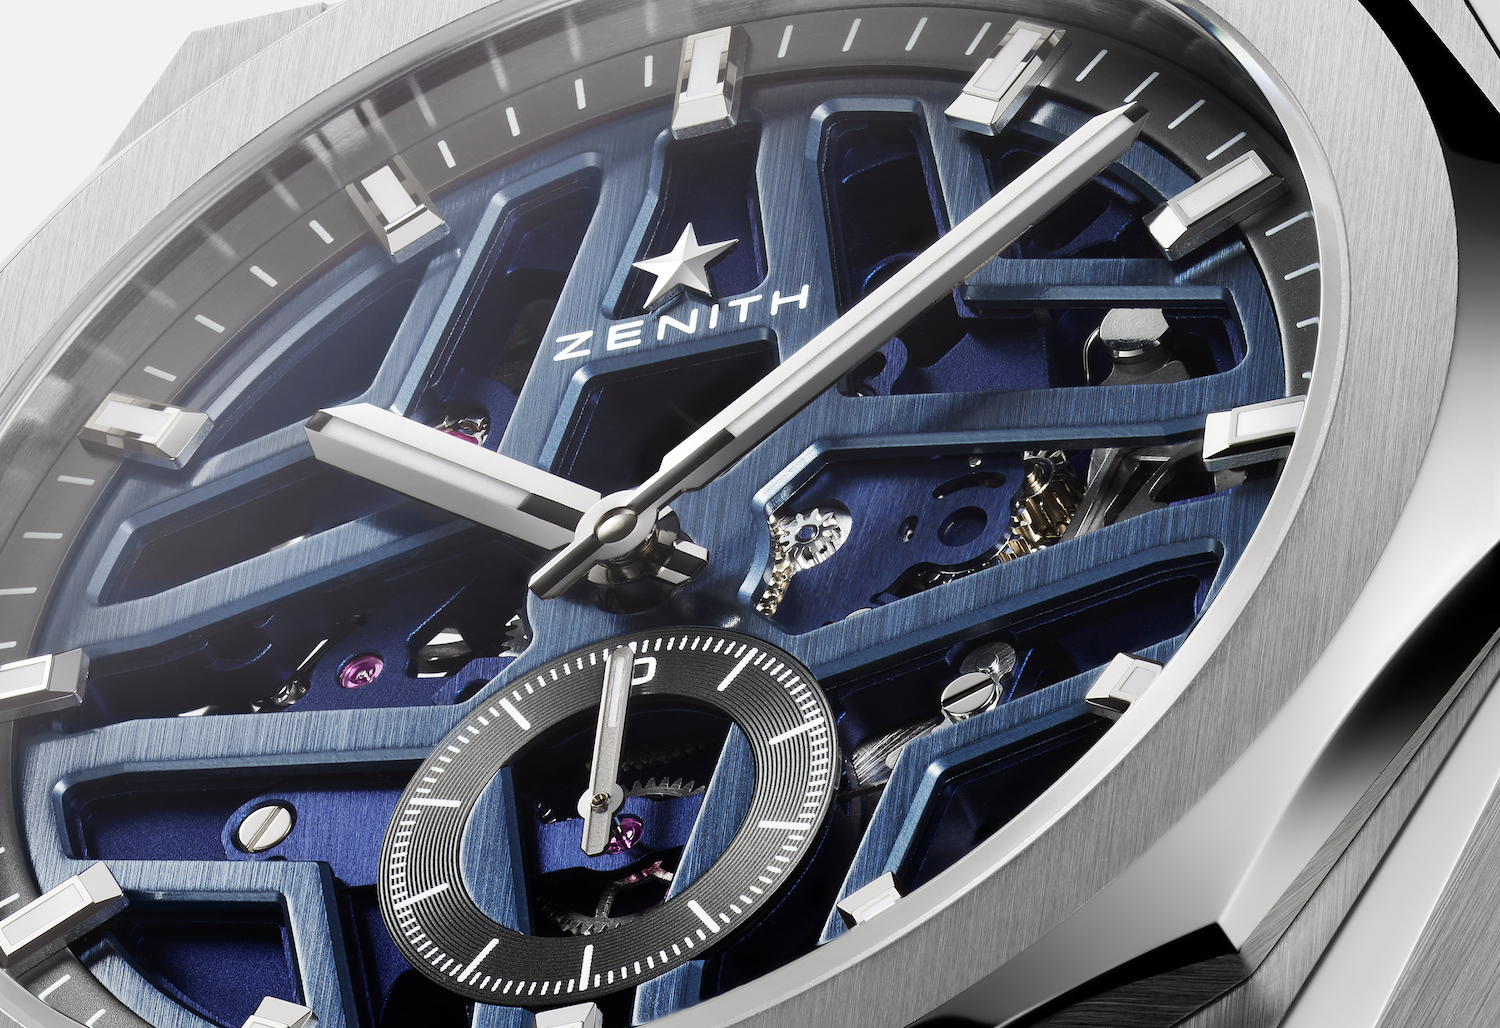 Zenith Have Created The Most Tasteful Skeletonised Watch Ever